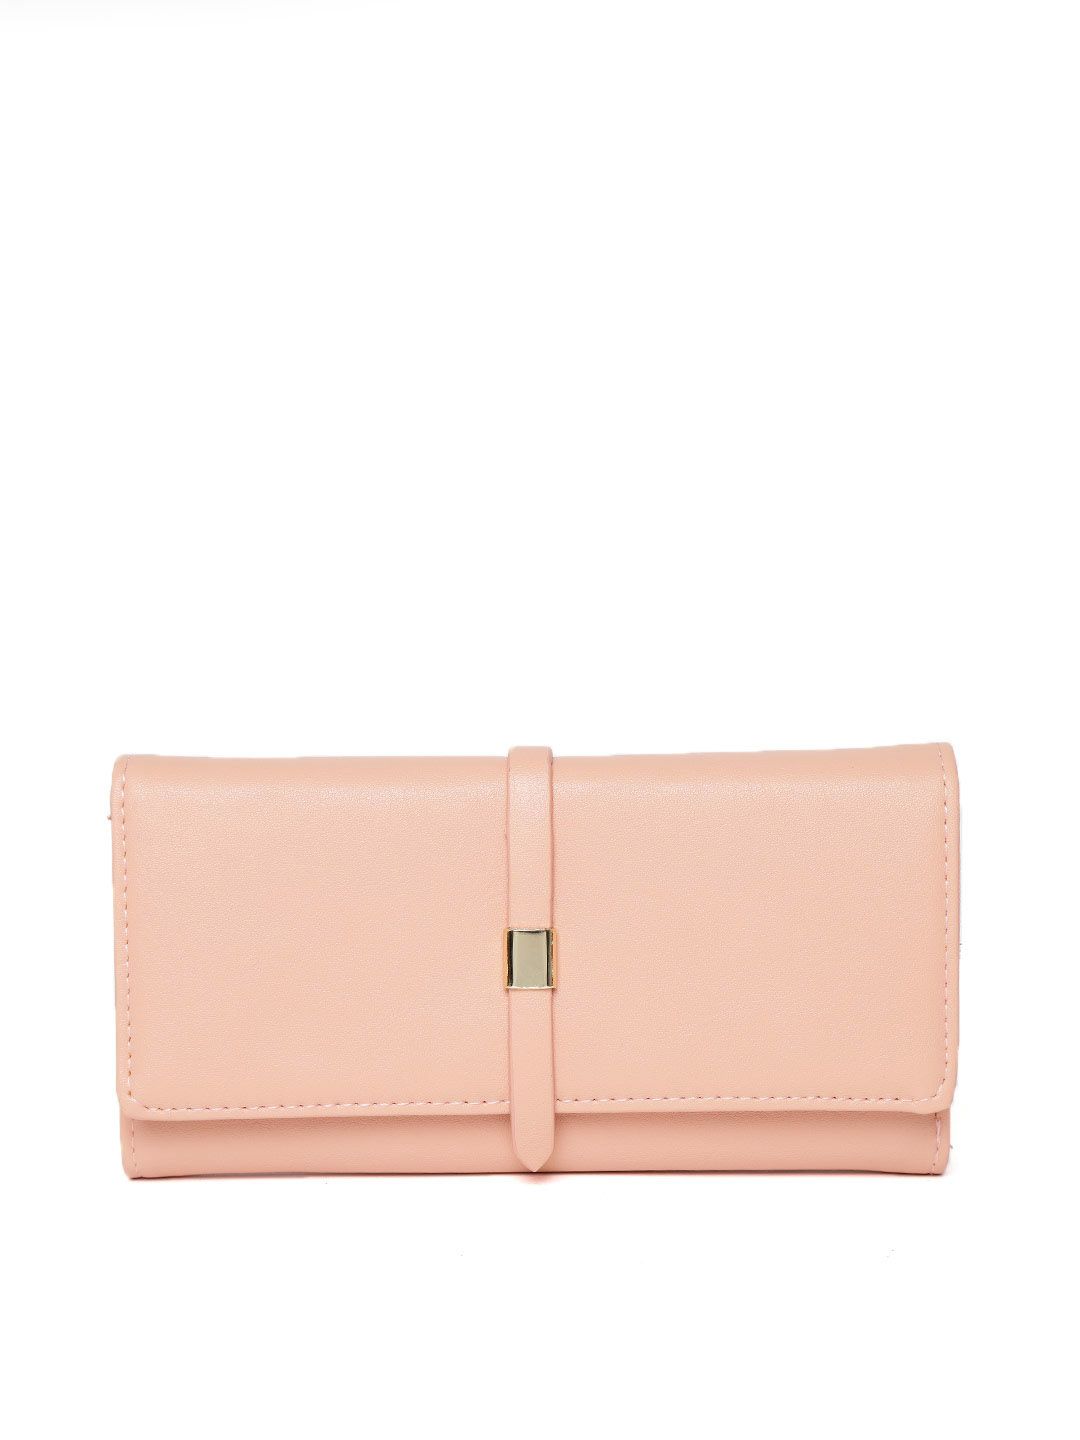 Lino Perros Women Peach-Coloured Solid Three Fold Wallet Price in India